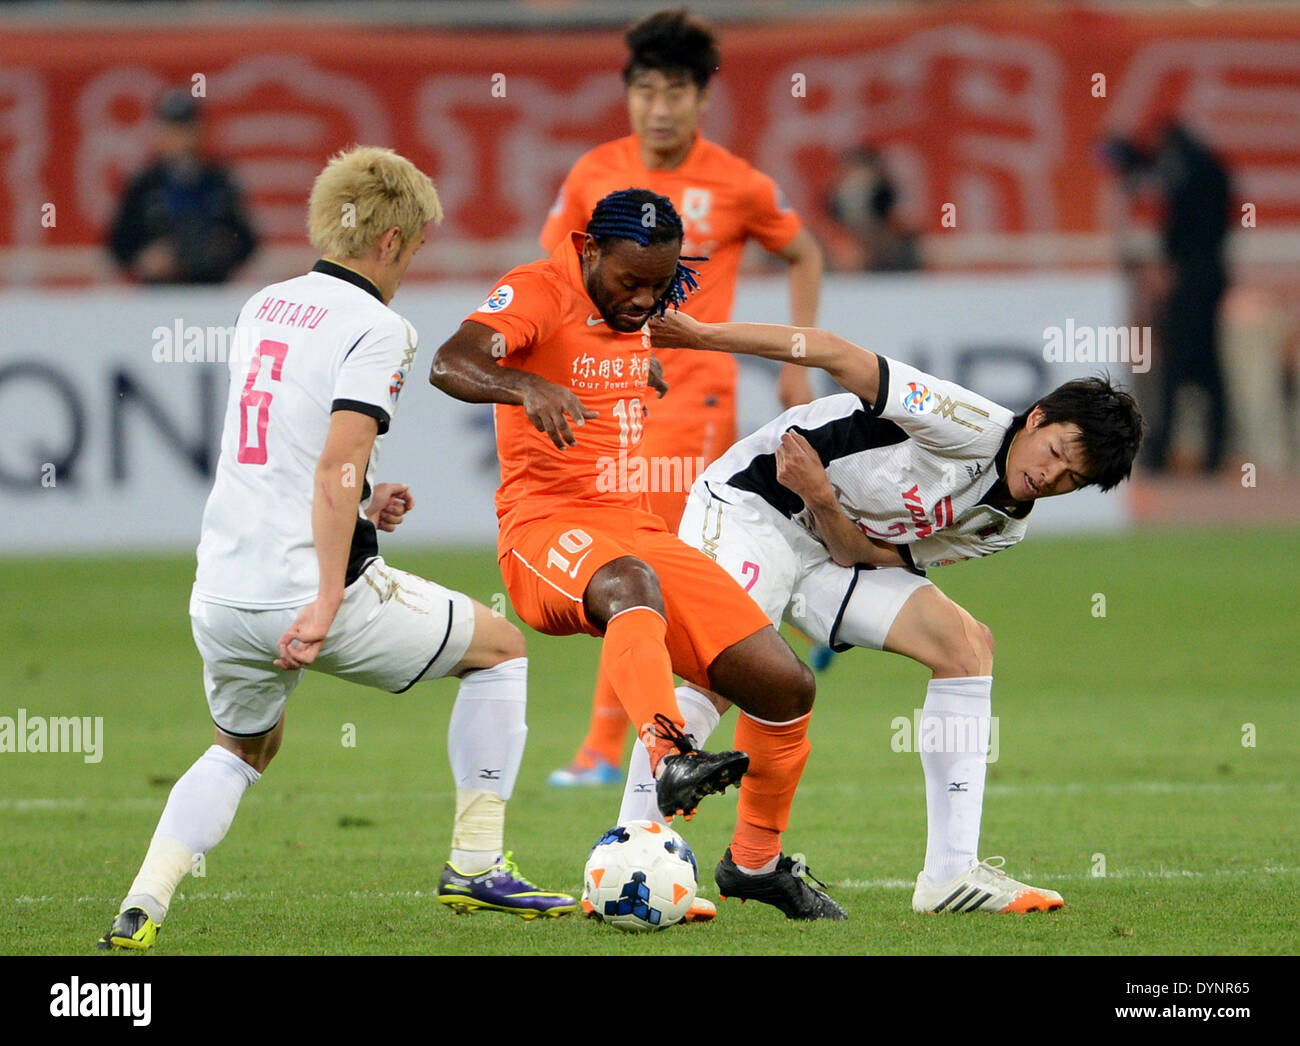 Jinan, China's Shandong Province. 23rd Apr, 2014. Vagner Love (C) of China's Shandong Luneng FC vies with Ohgihara Takahiro (R) and Yamaguchi Hotaru (L) of Japan's Cerezo Osaka during the 2014 AFC Champions League Group E match in Jinan, capital of east China's Shandong Province, April 23, 2014. Cerezo Osaka won 2-1. © Zhu Zheng/Xinhua/Alamy Live News Stock Photo